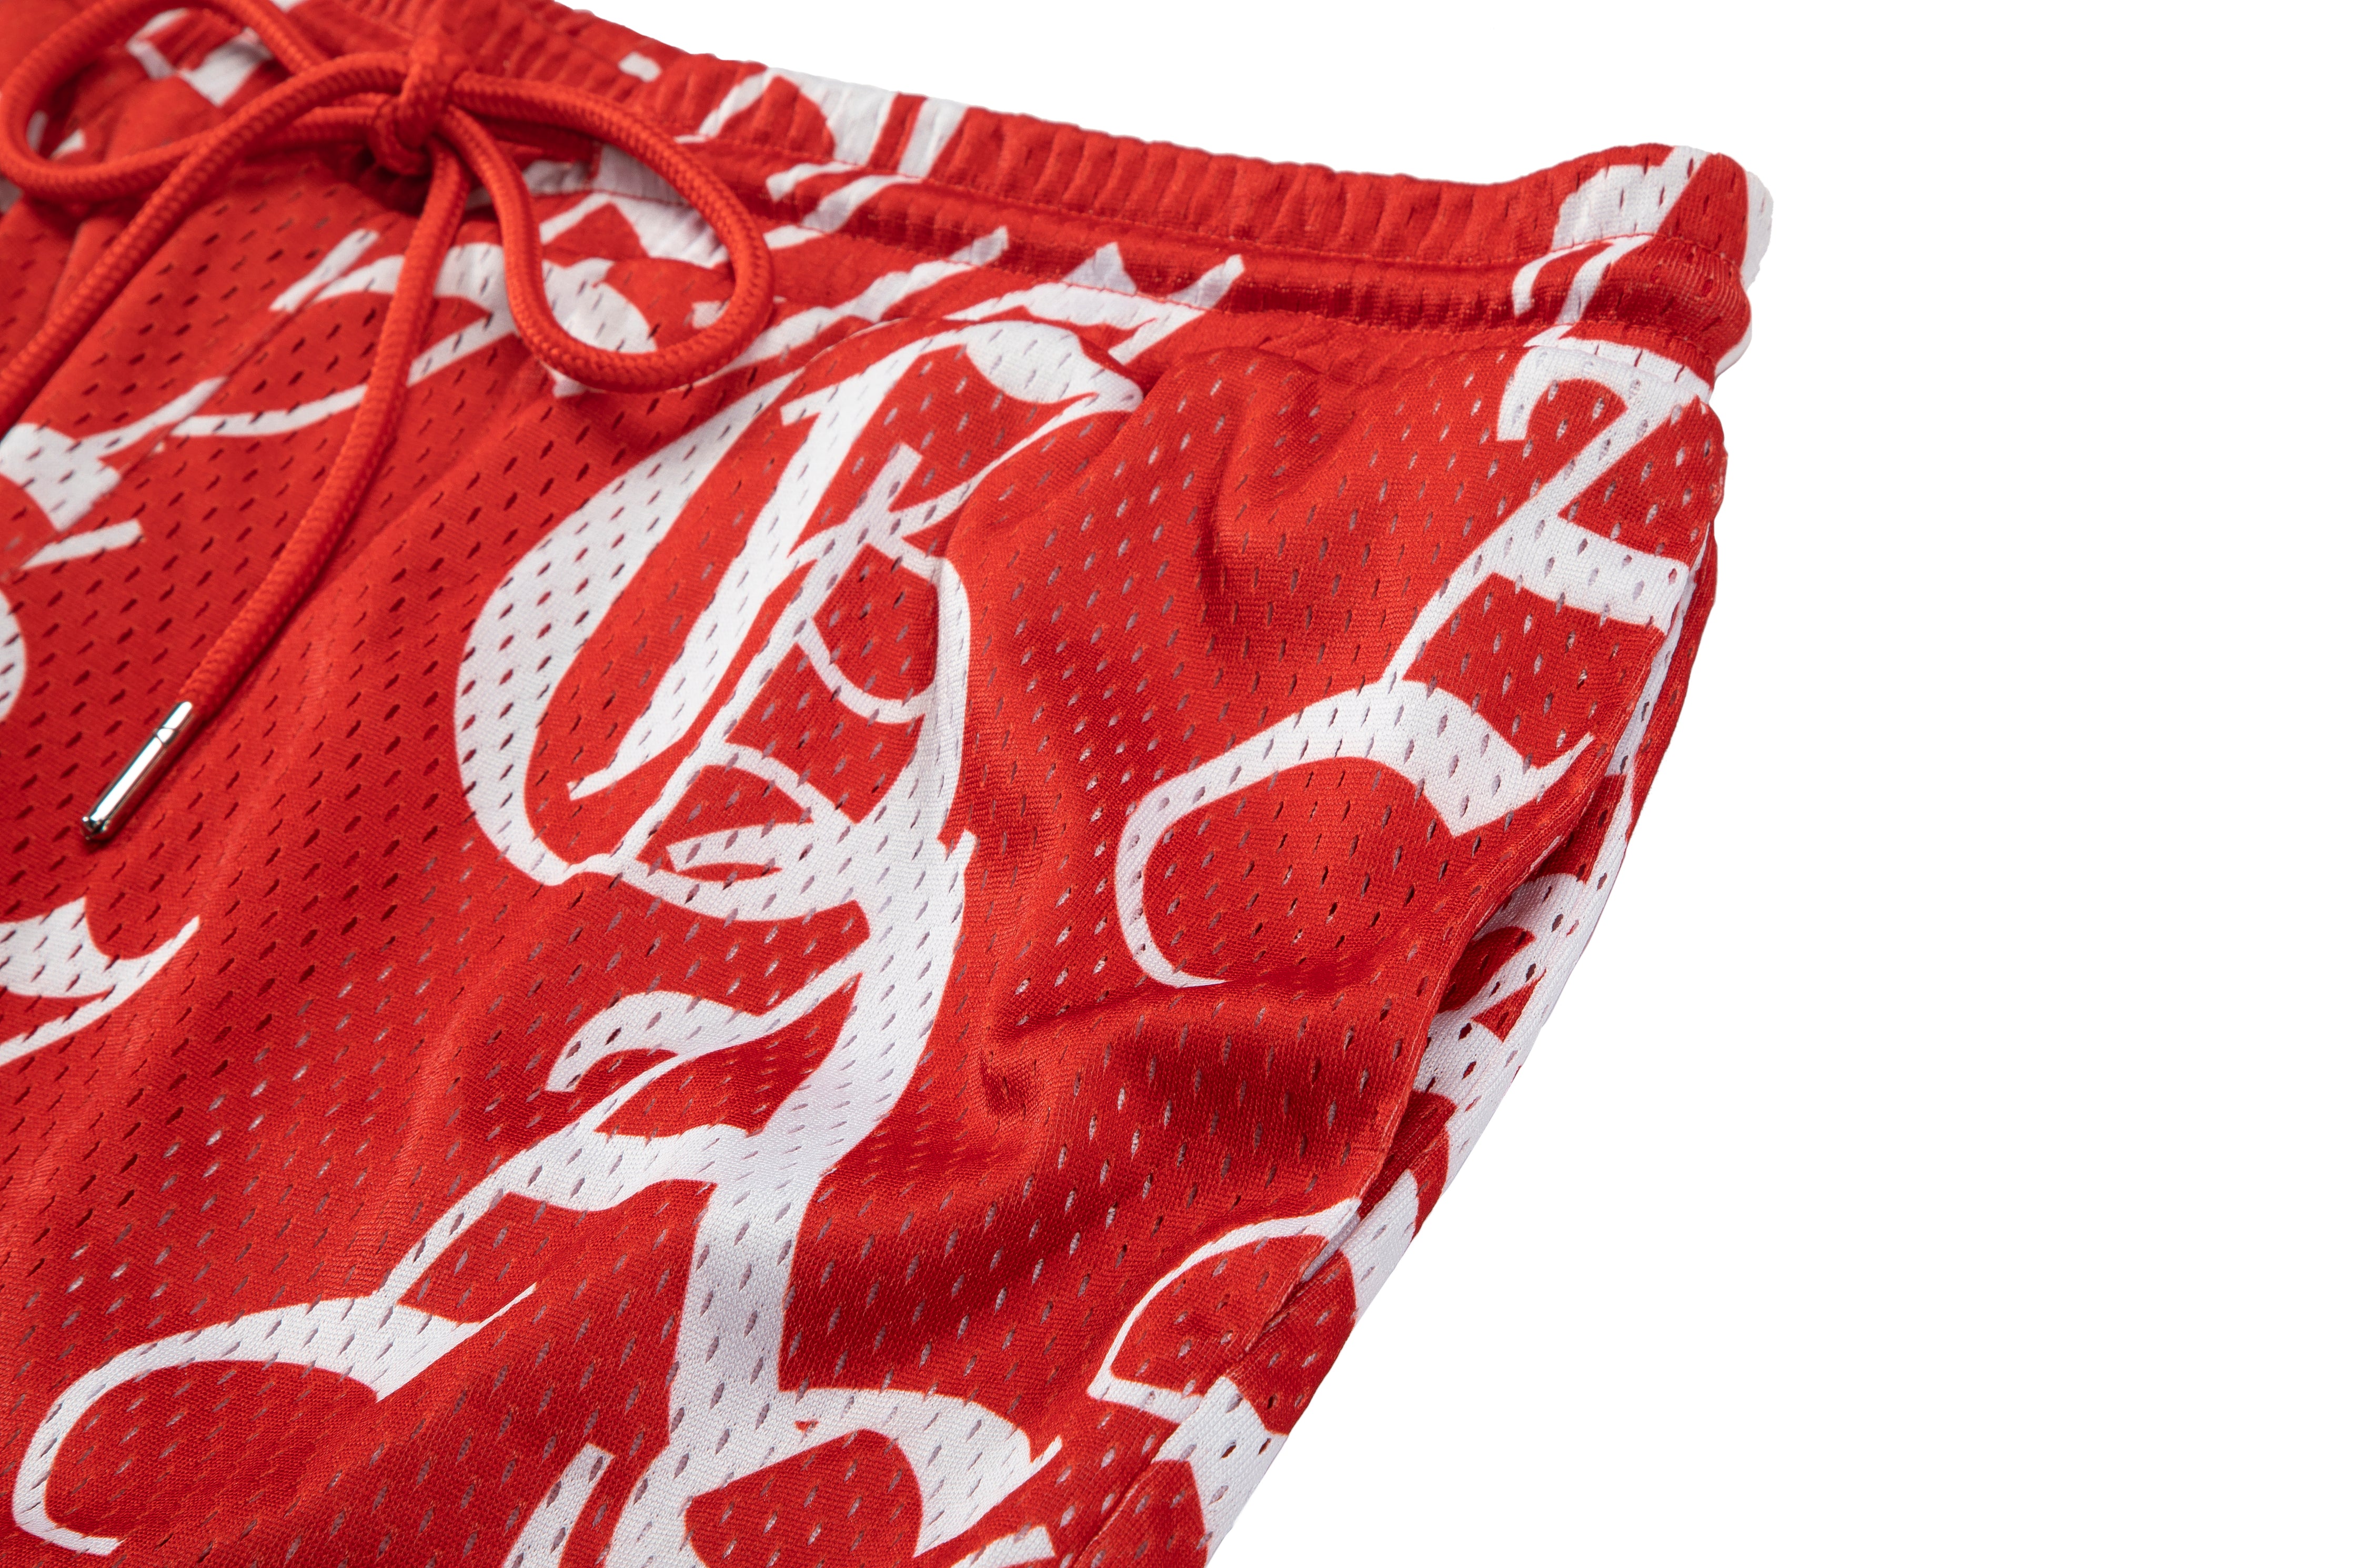 OE Mesh Shorts (Red)